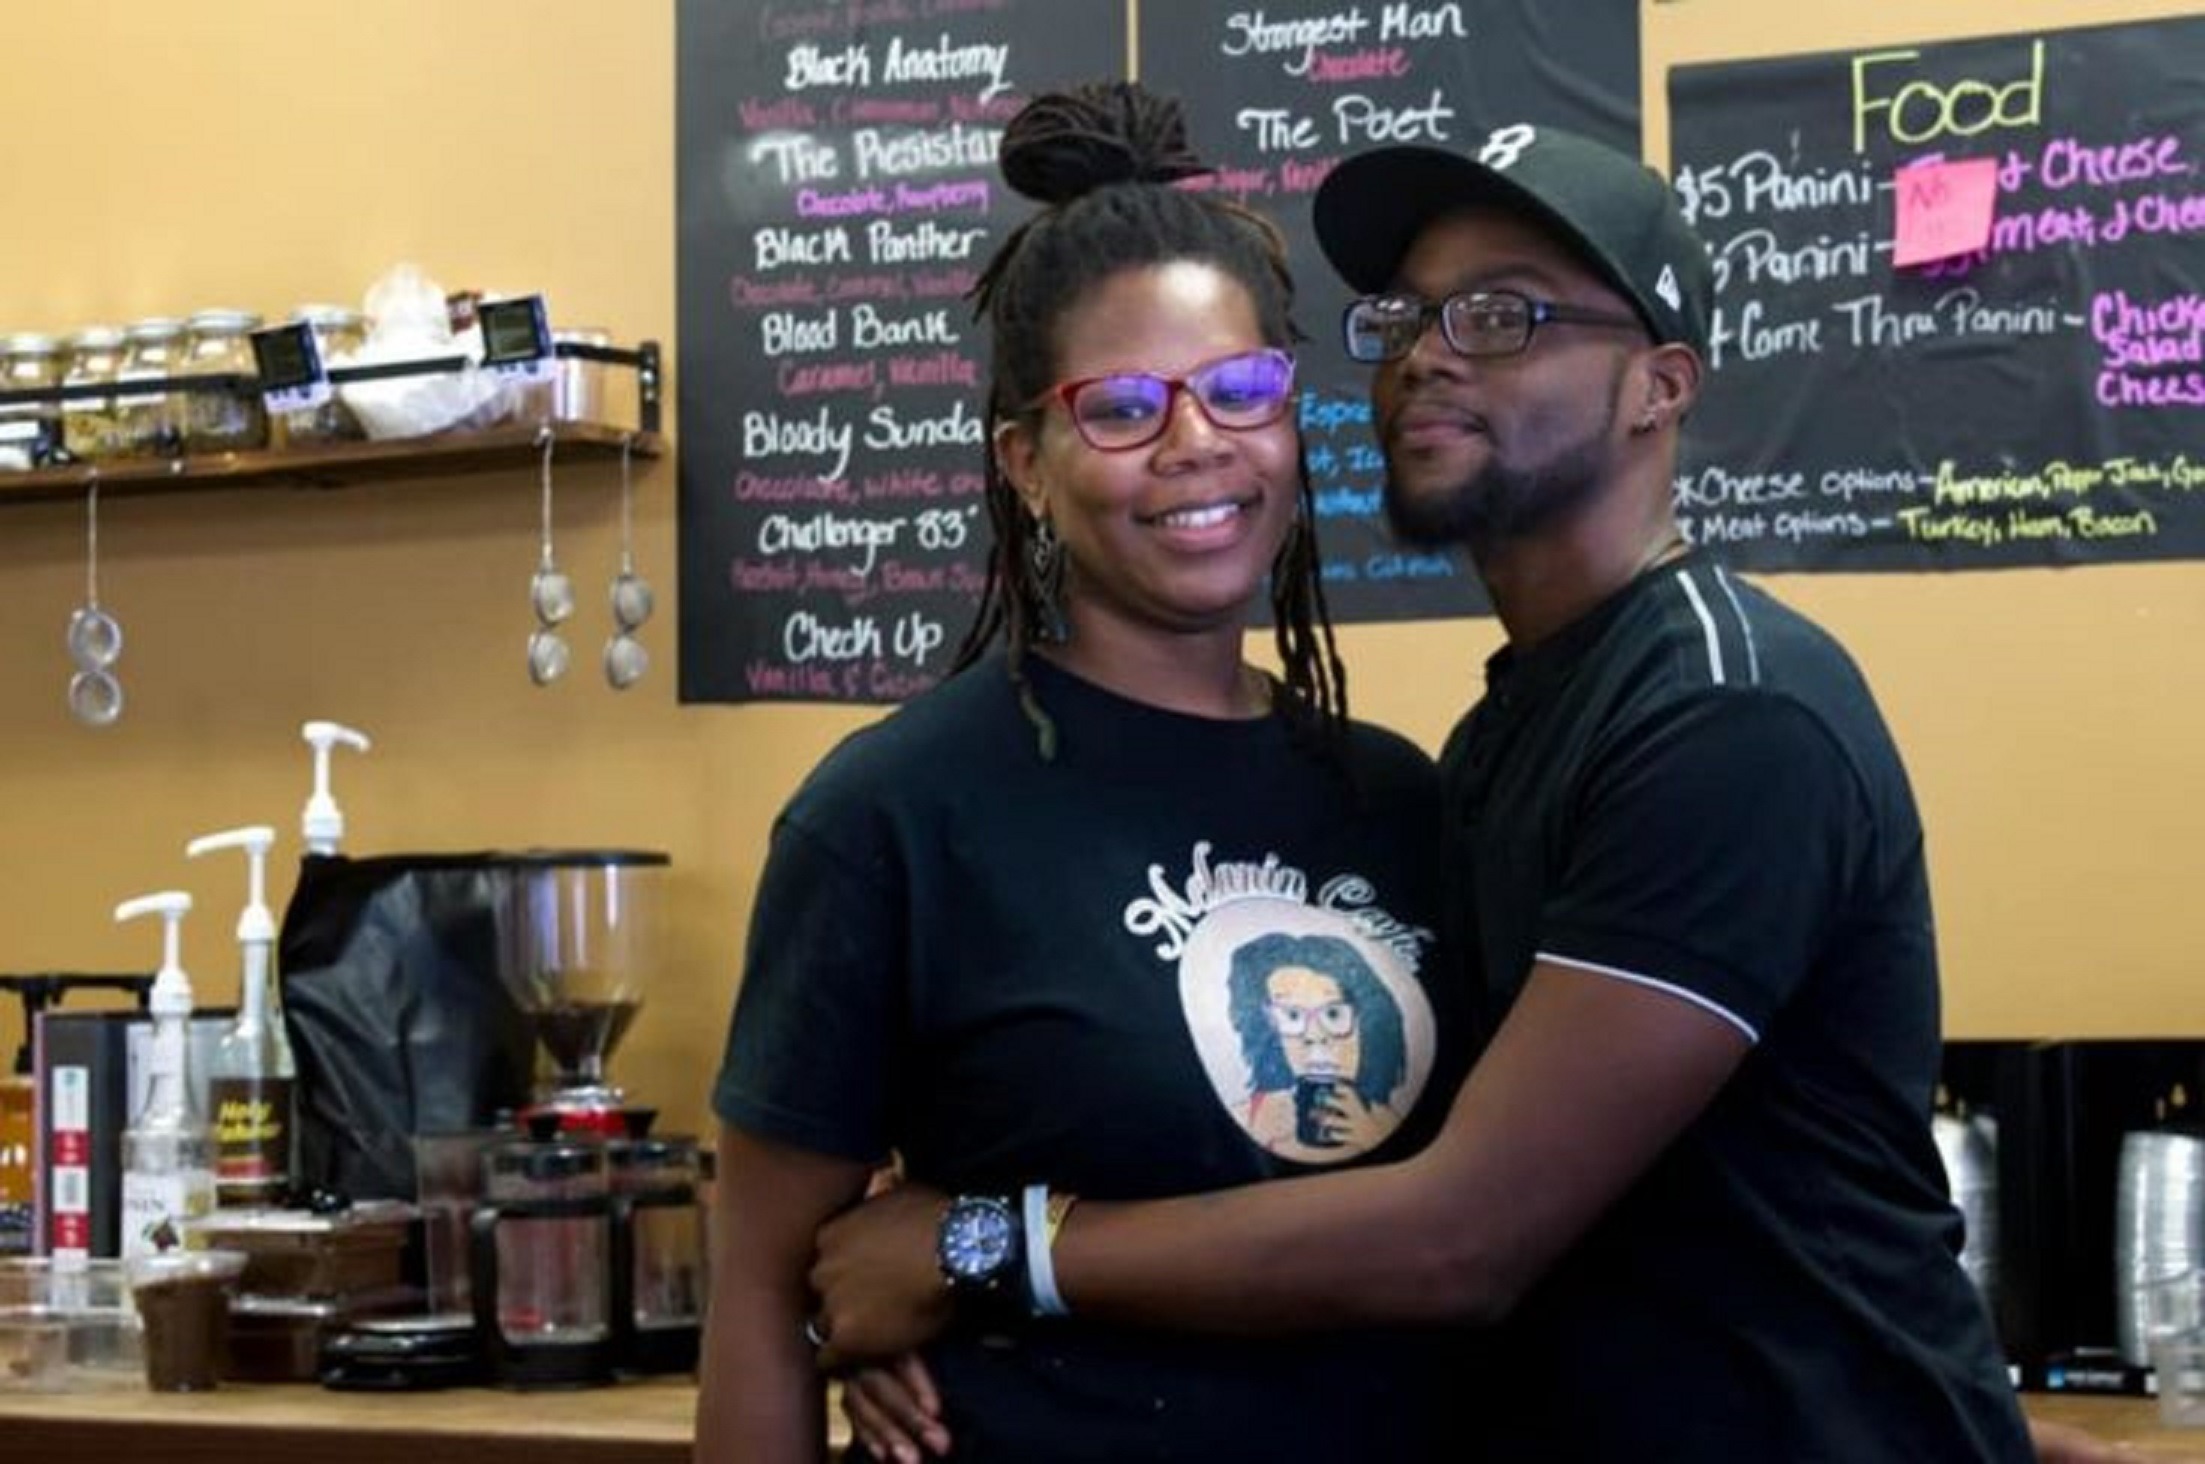 Melanin Café The Alabama Coffee Shop That Teaches Black History With Every Cup They Serve